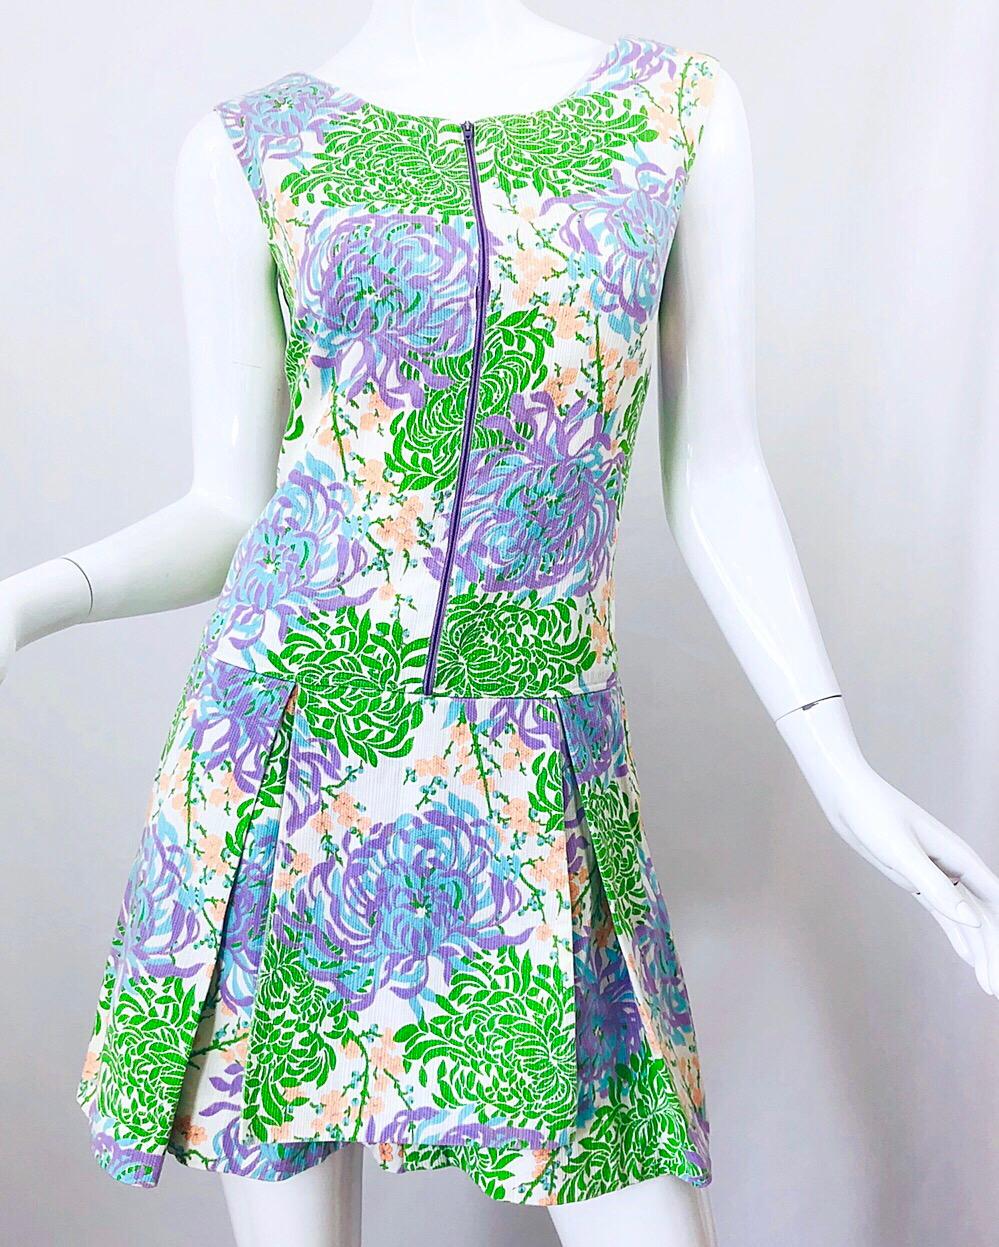 Chic 1960s pastel purple, blue, pink, green and white cotton blend sleeveless one piece romper! The construction on this shorts jumpsuit is unlike any I have ever seen. Hidden zippers under the crotch makes these easy to take on and off. Purple